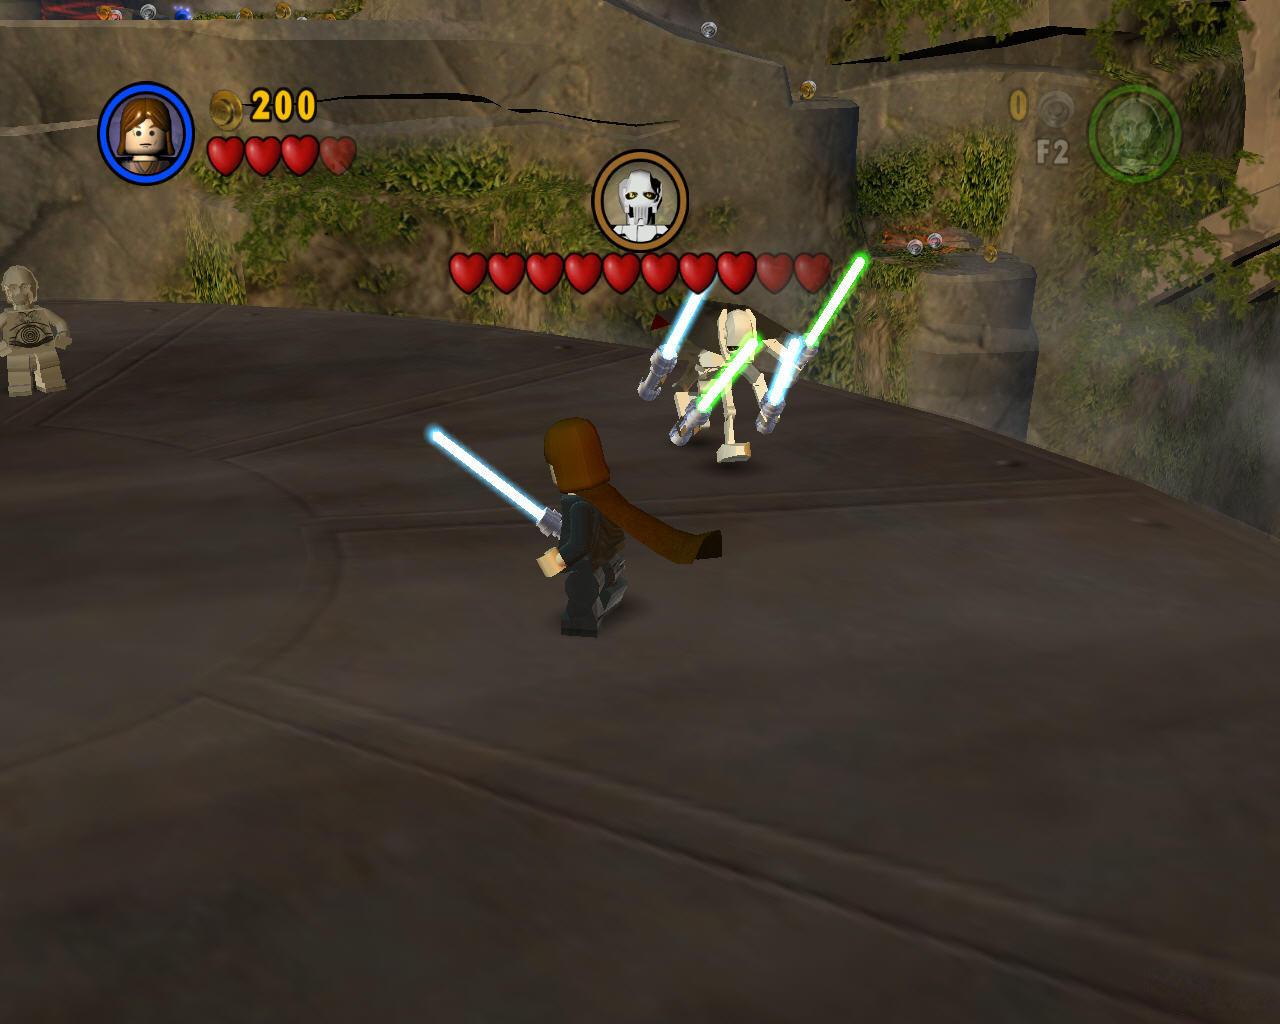 LEGO Star Wars: The Video Game Download (2005 Arcade action Game)